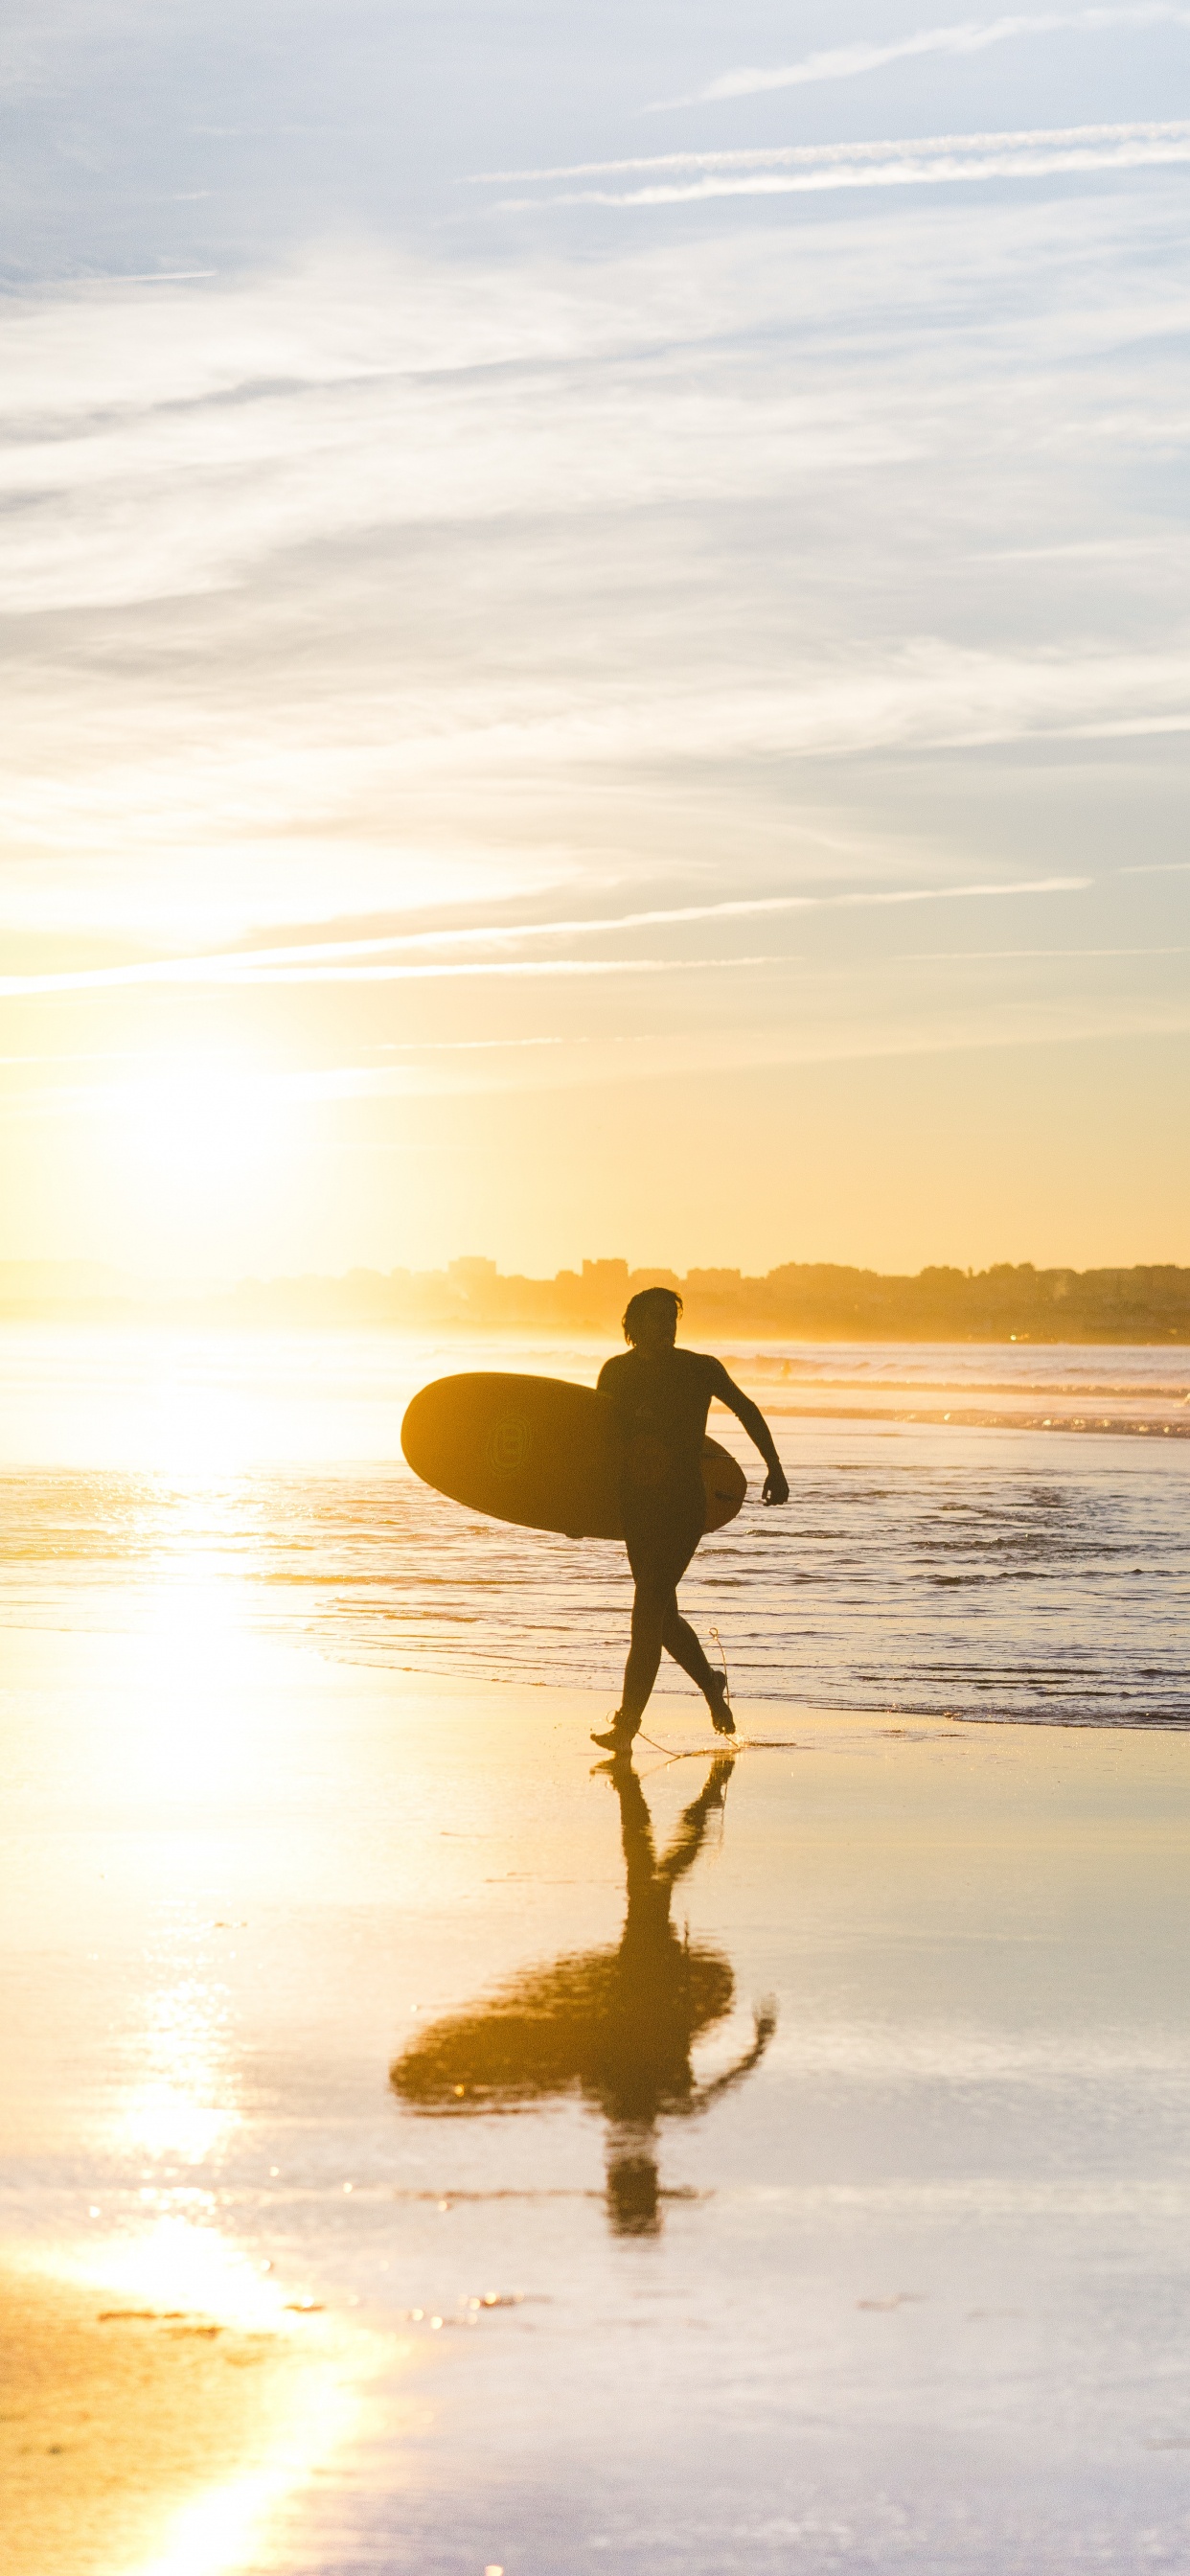 Man in Black Shorts Holding Surfboard Walking on Seashore During Sunset. Wallpaper in 1242x2688 Resolution